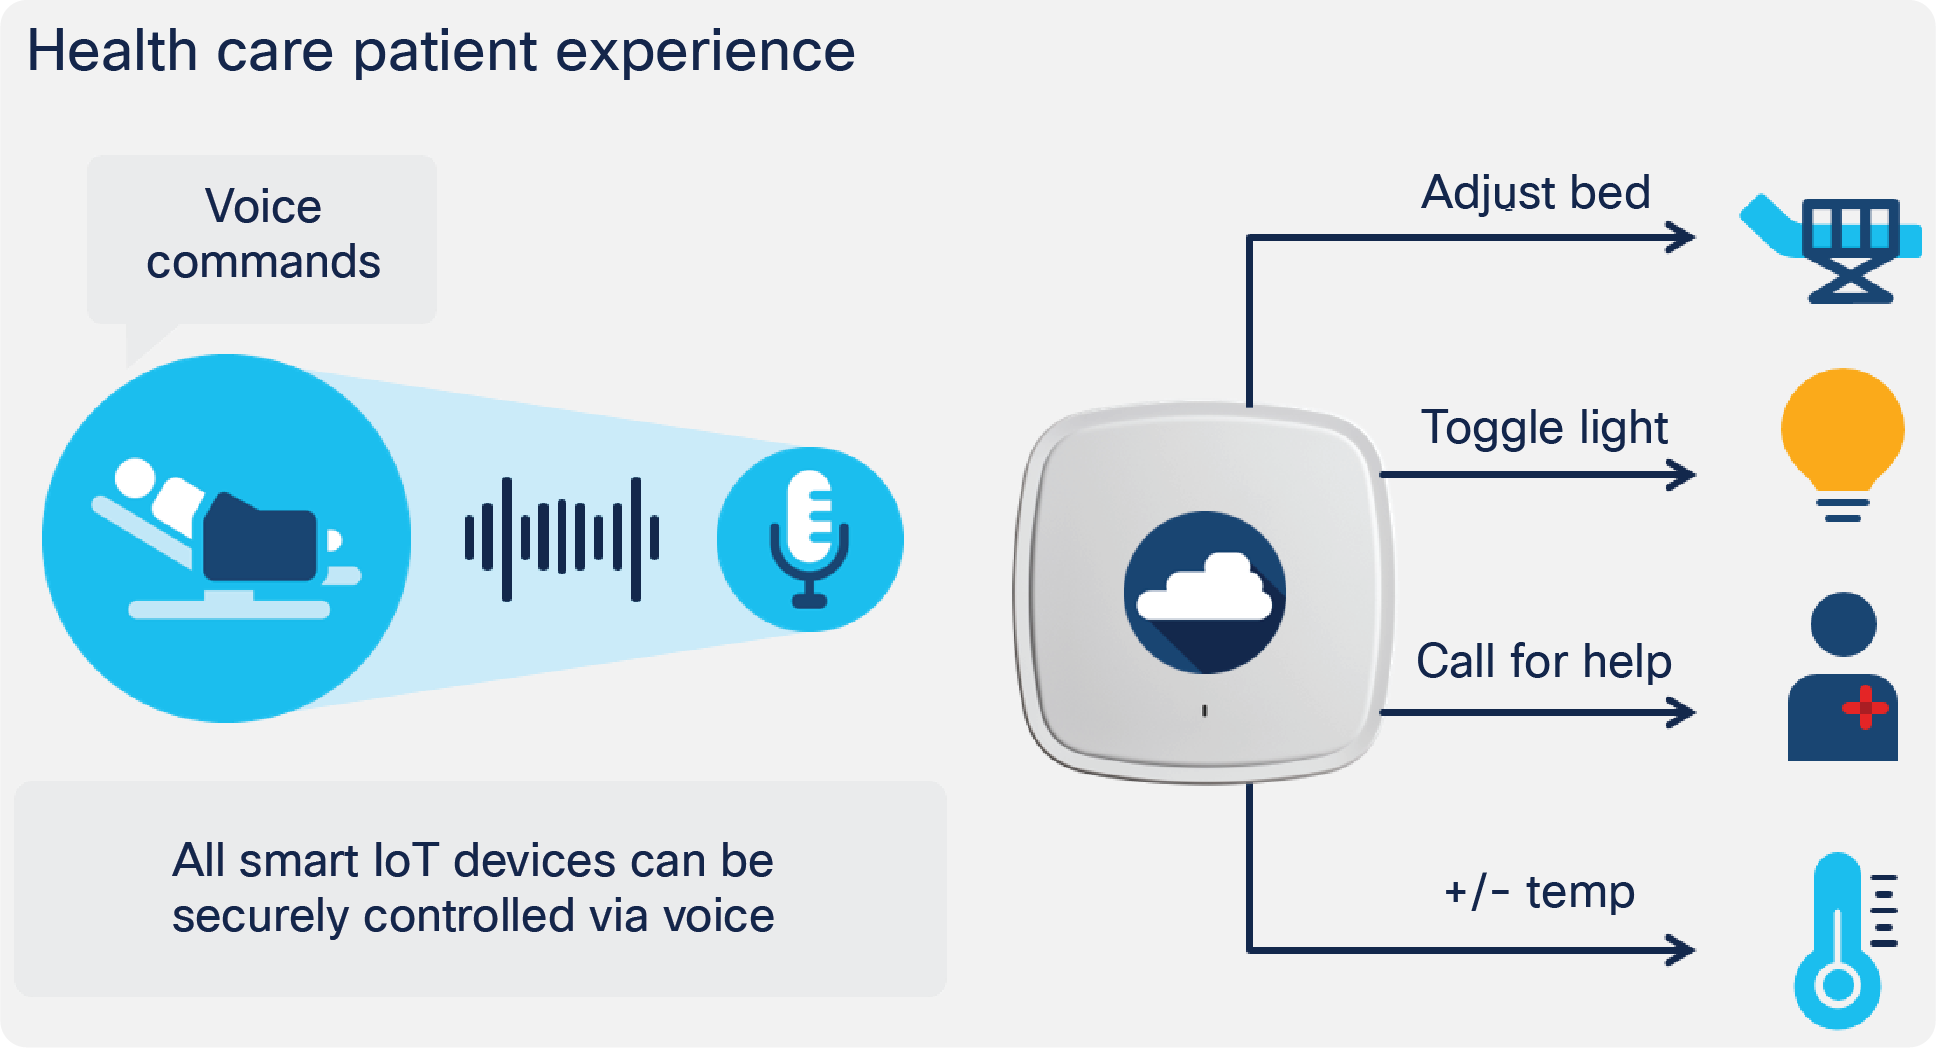 Patients leveraging Cisco IoT technology to control devices through voice